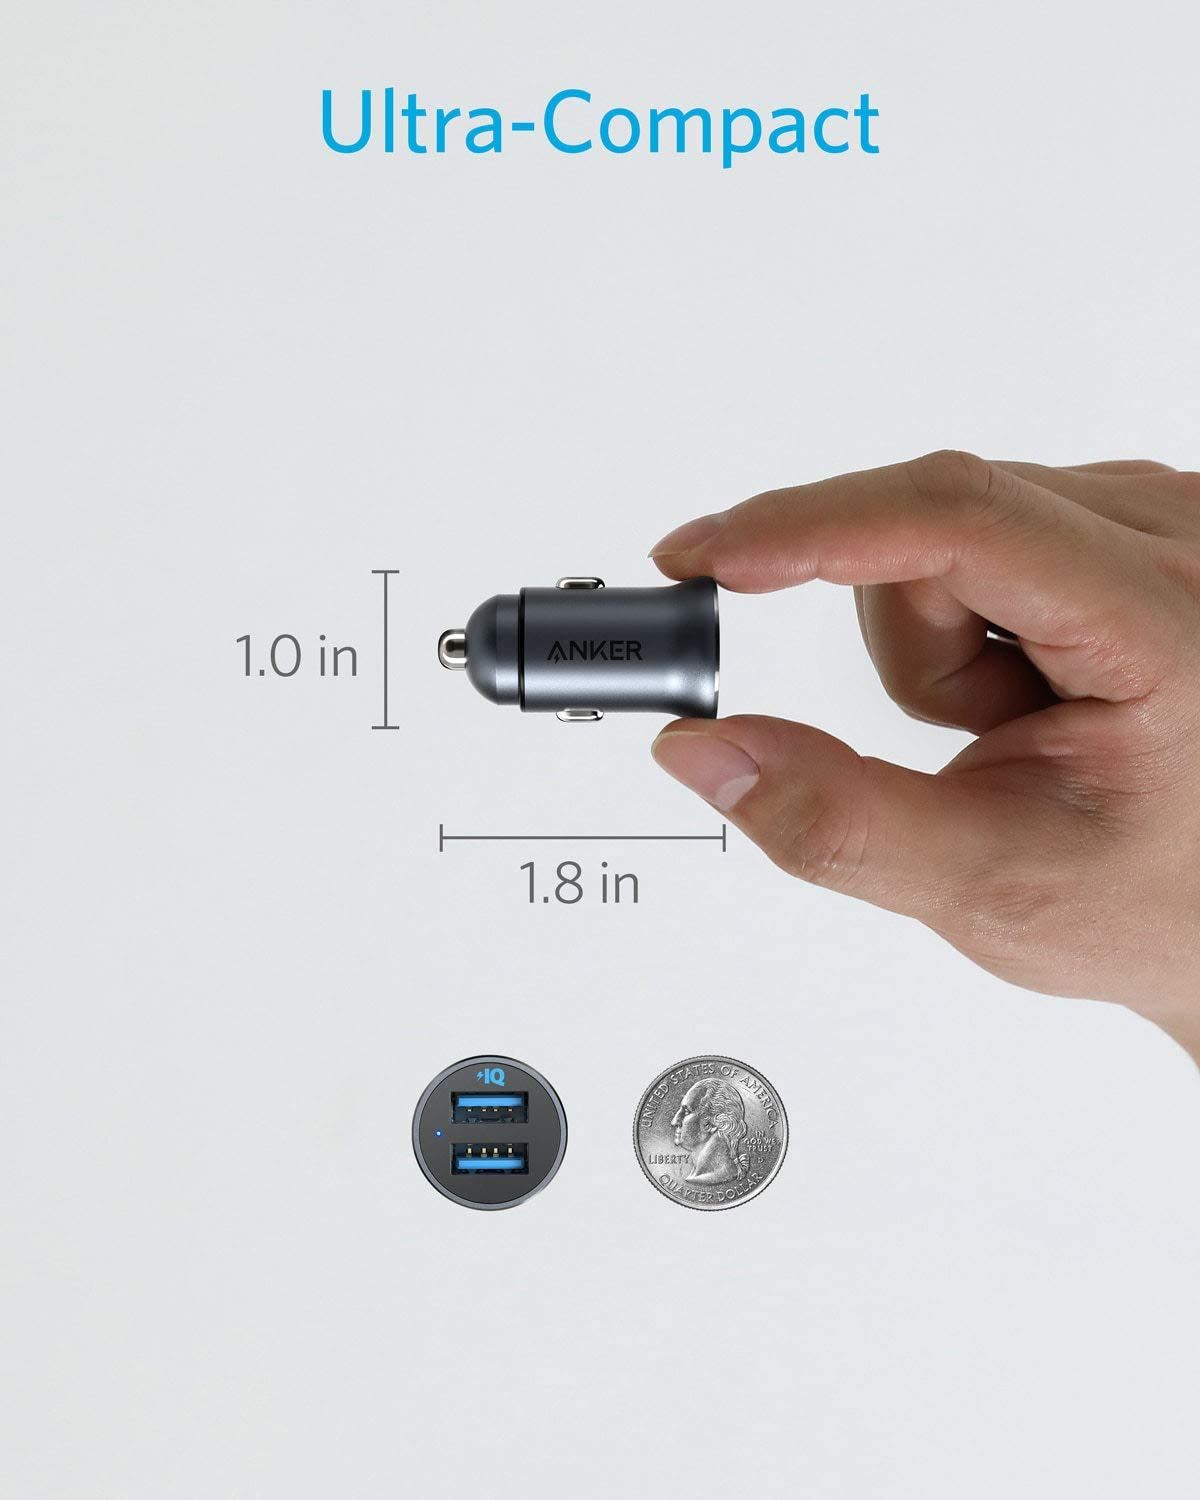 Anker Car Charger dimensions